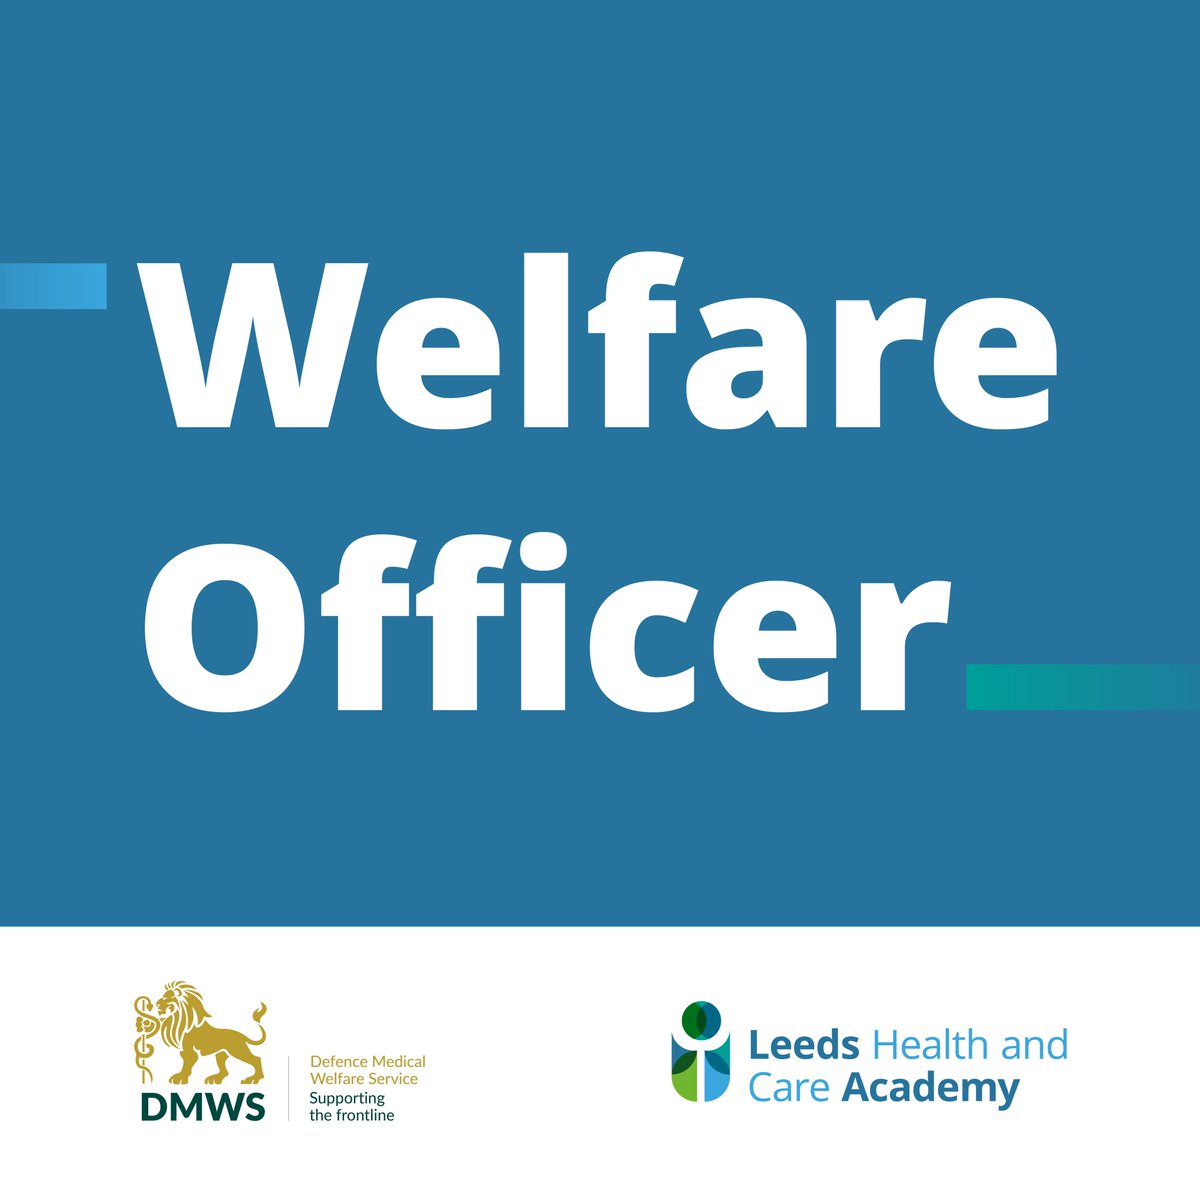 Feel like you could benefit from extra support? The Welfare Officer can work with you on a one-to-one basis, providing emotional and practical support during stressful and uncertain times. Find out more about this service: leedshealthandcareacademy.org/learning/welfa… #StressAwarenessMonth @TheDMWS